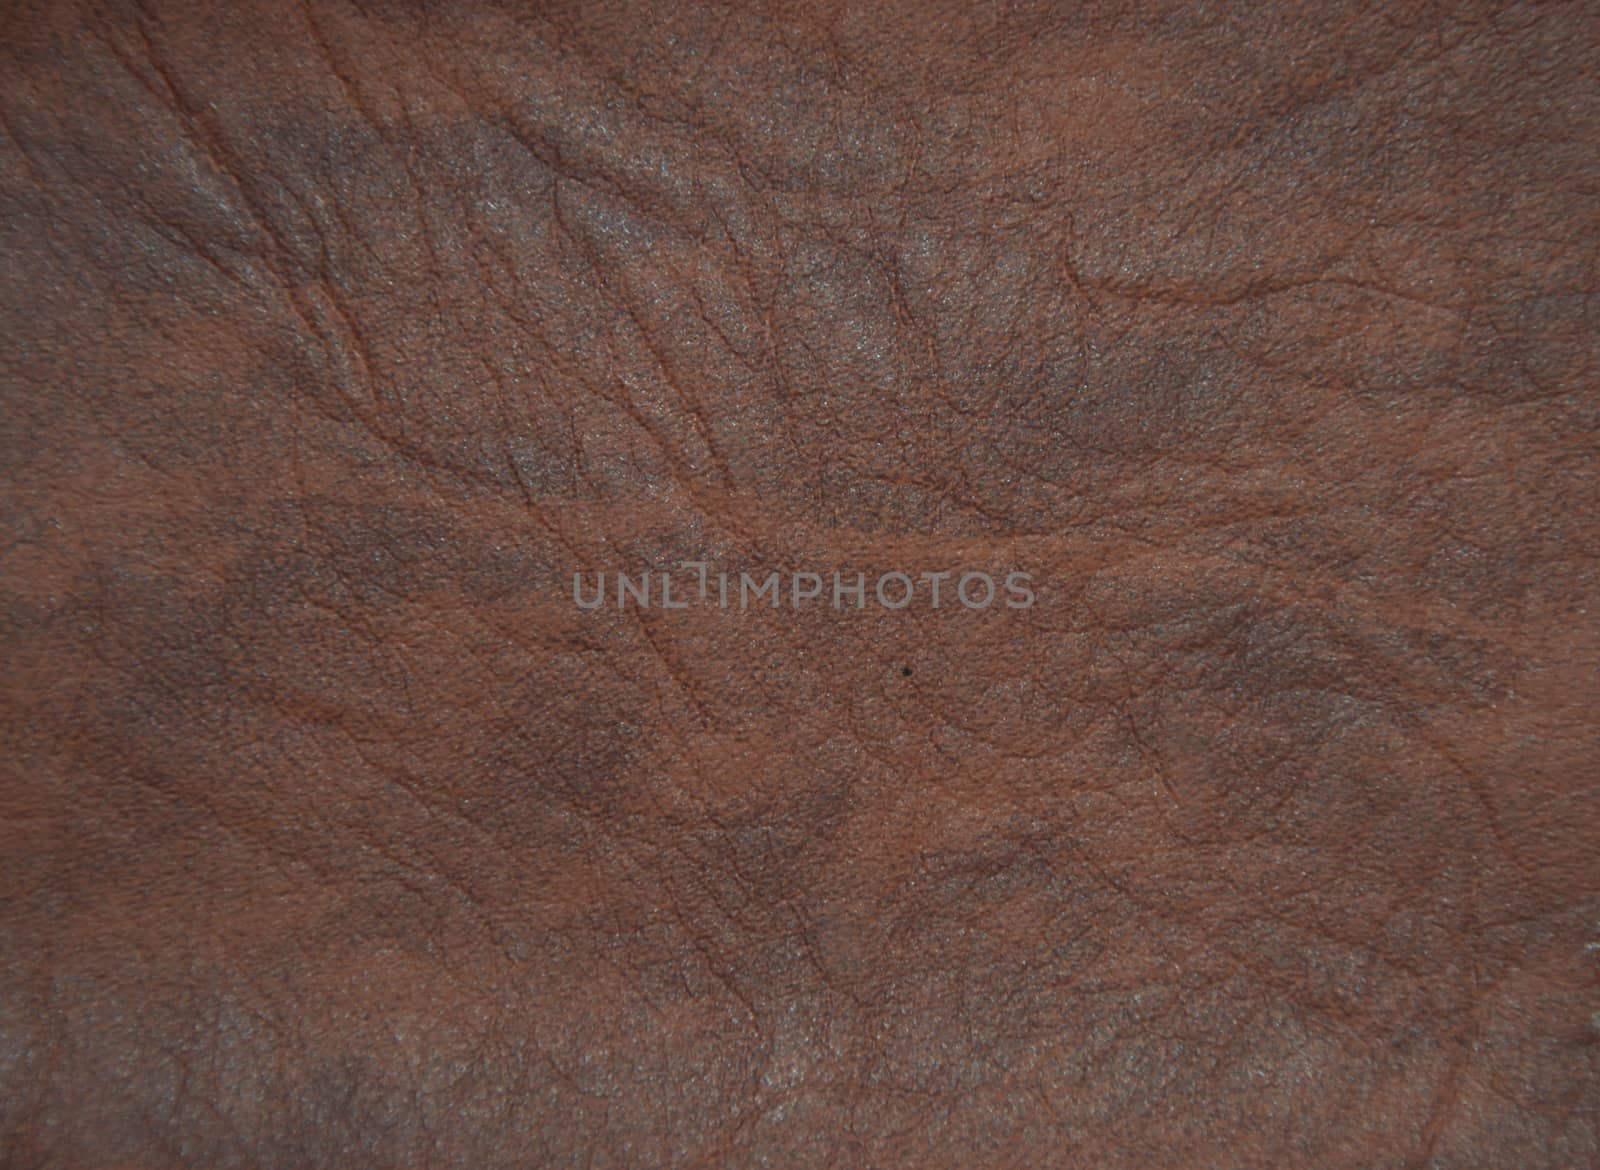 Decorative surface imitating artificially made leather. The picture was taken in the daytime, closeup.